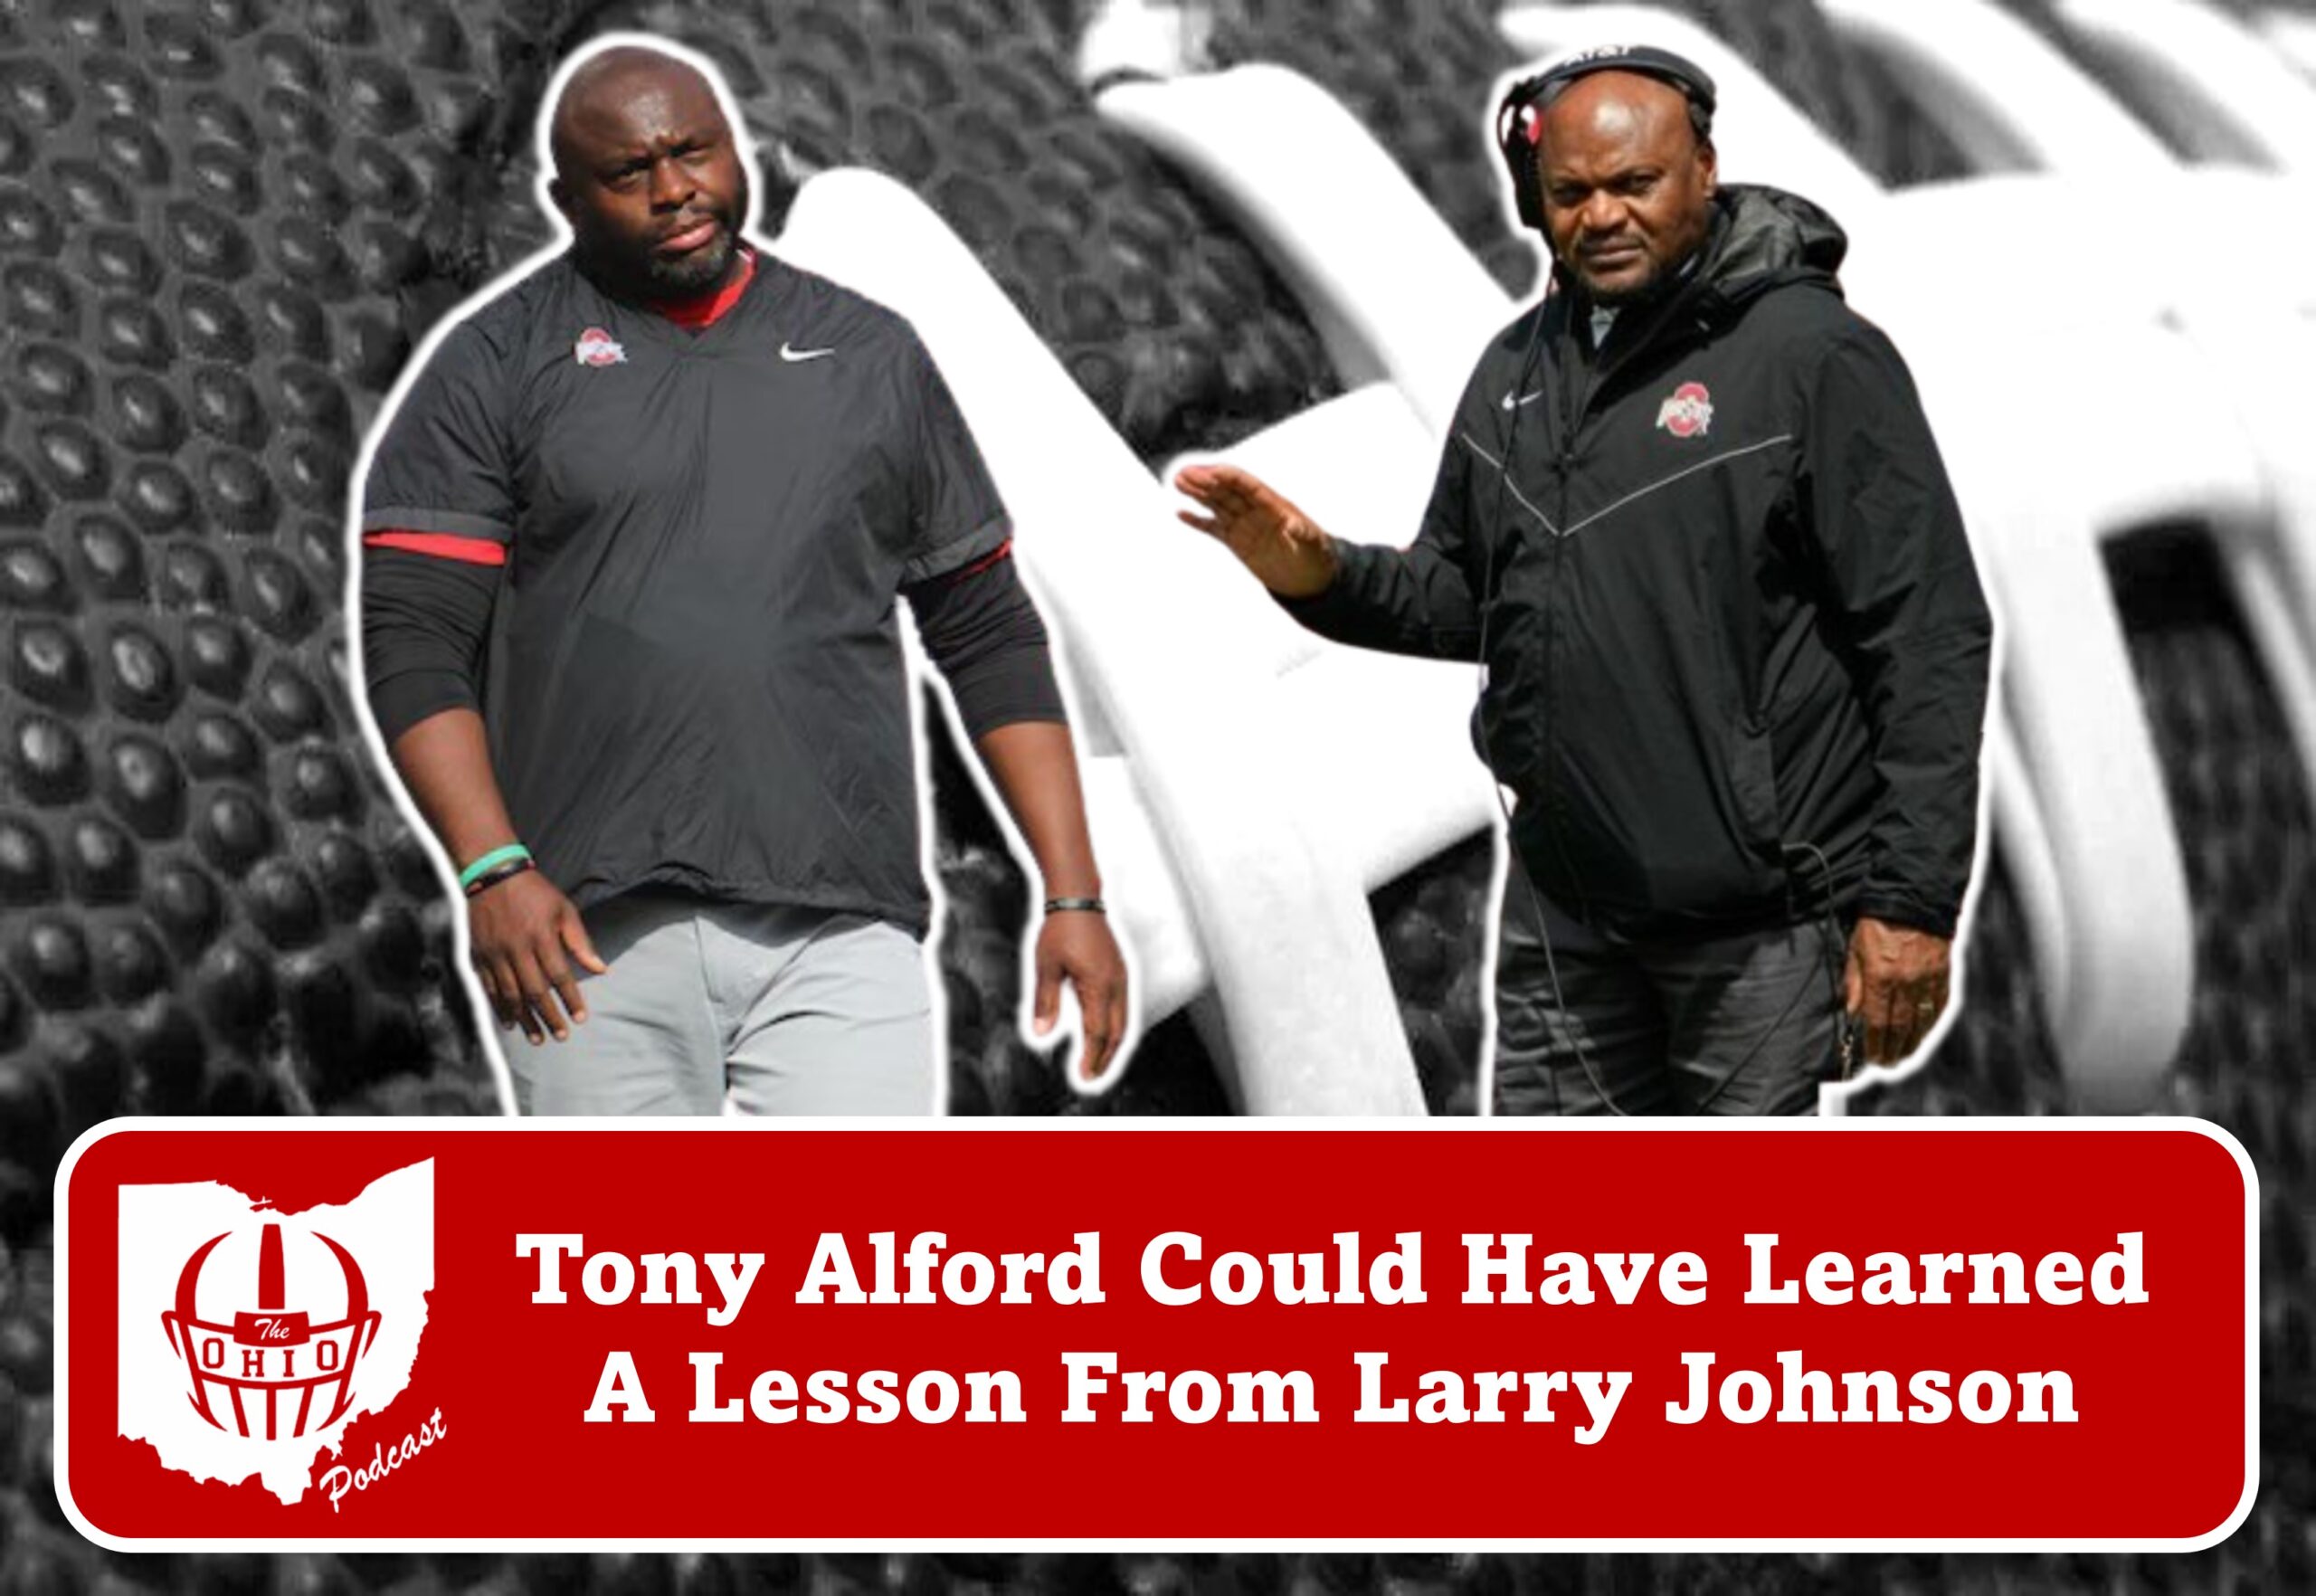 Tony Alford Could Learn A Thing Or Two From Larry Johnson